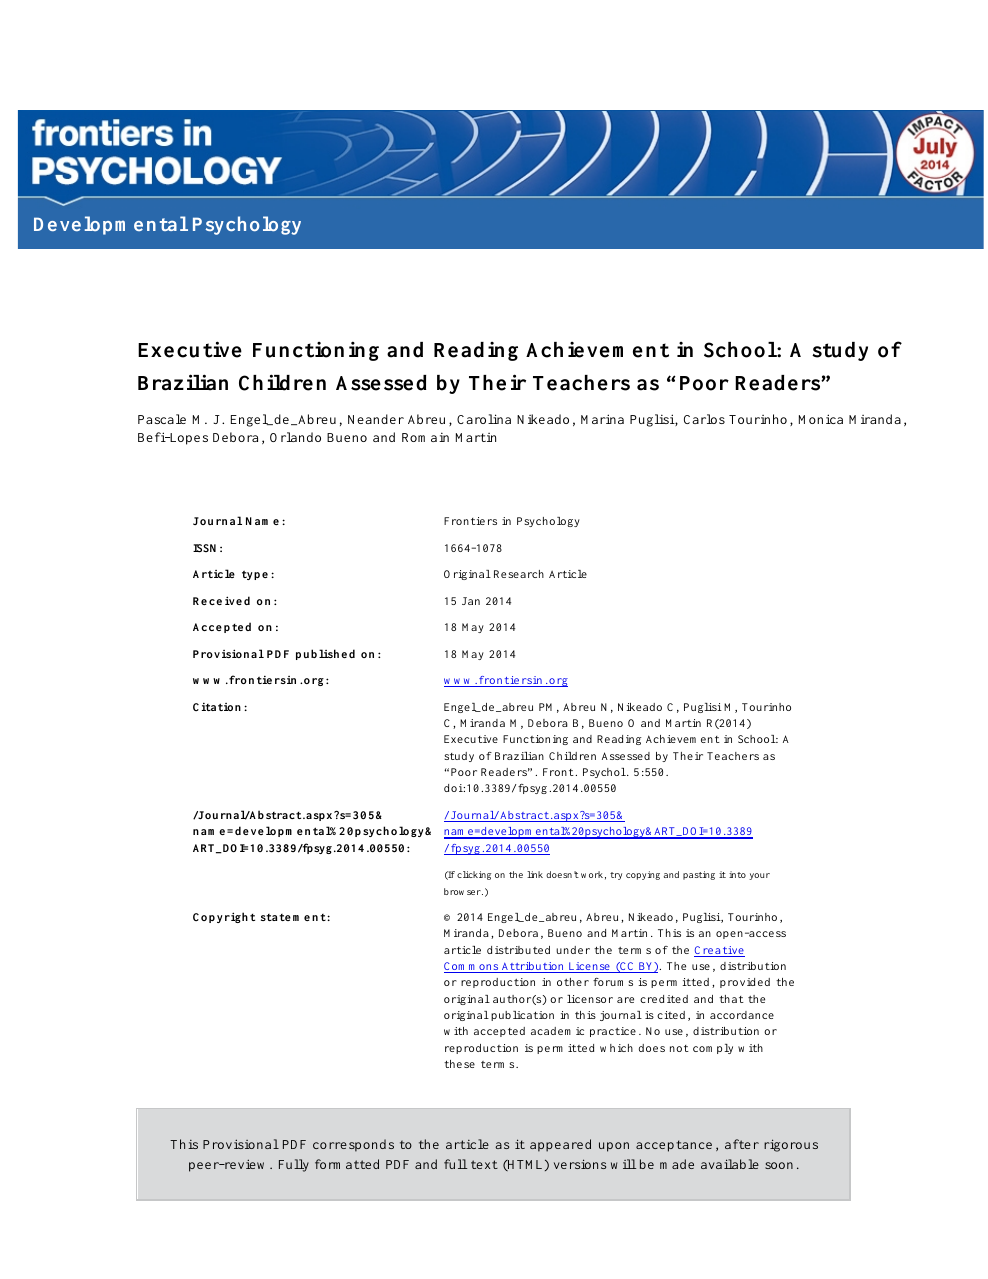 Executive Functioning And Reading Achievement In School A Study Of Brazilian Children Assessed By Their Teachers As A œpoor Readersa Topic Of Research Paper In Psychology Download Scholarly Article Pdf And Read